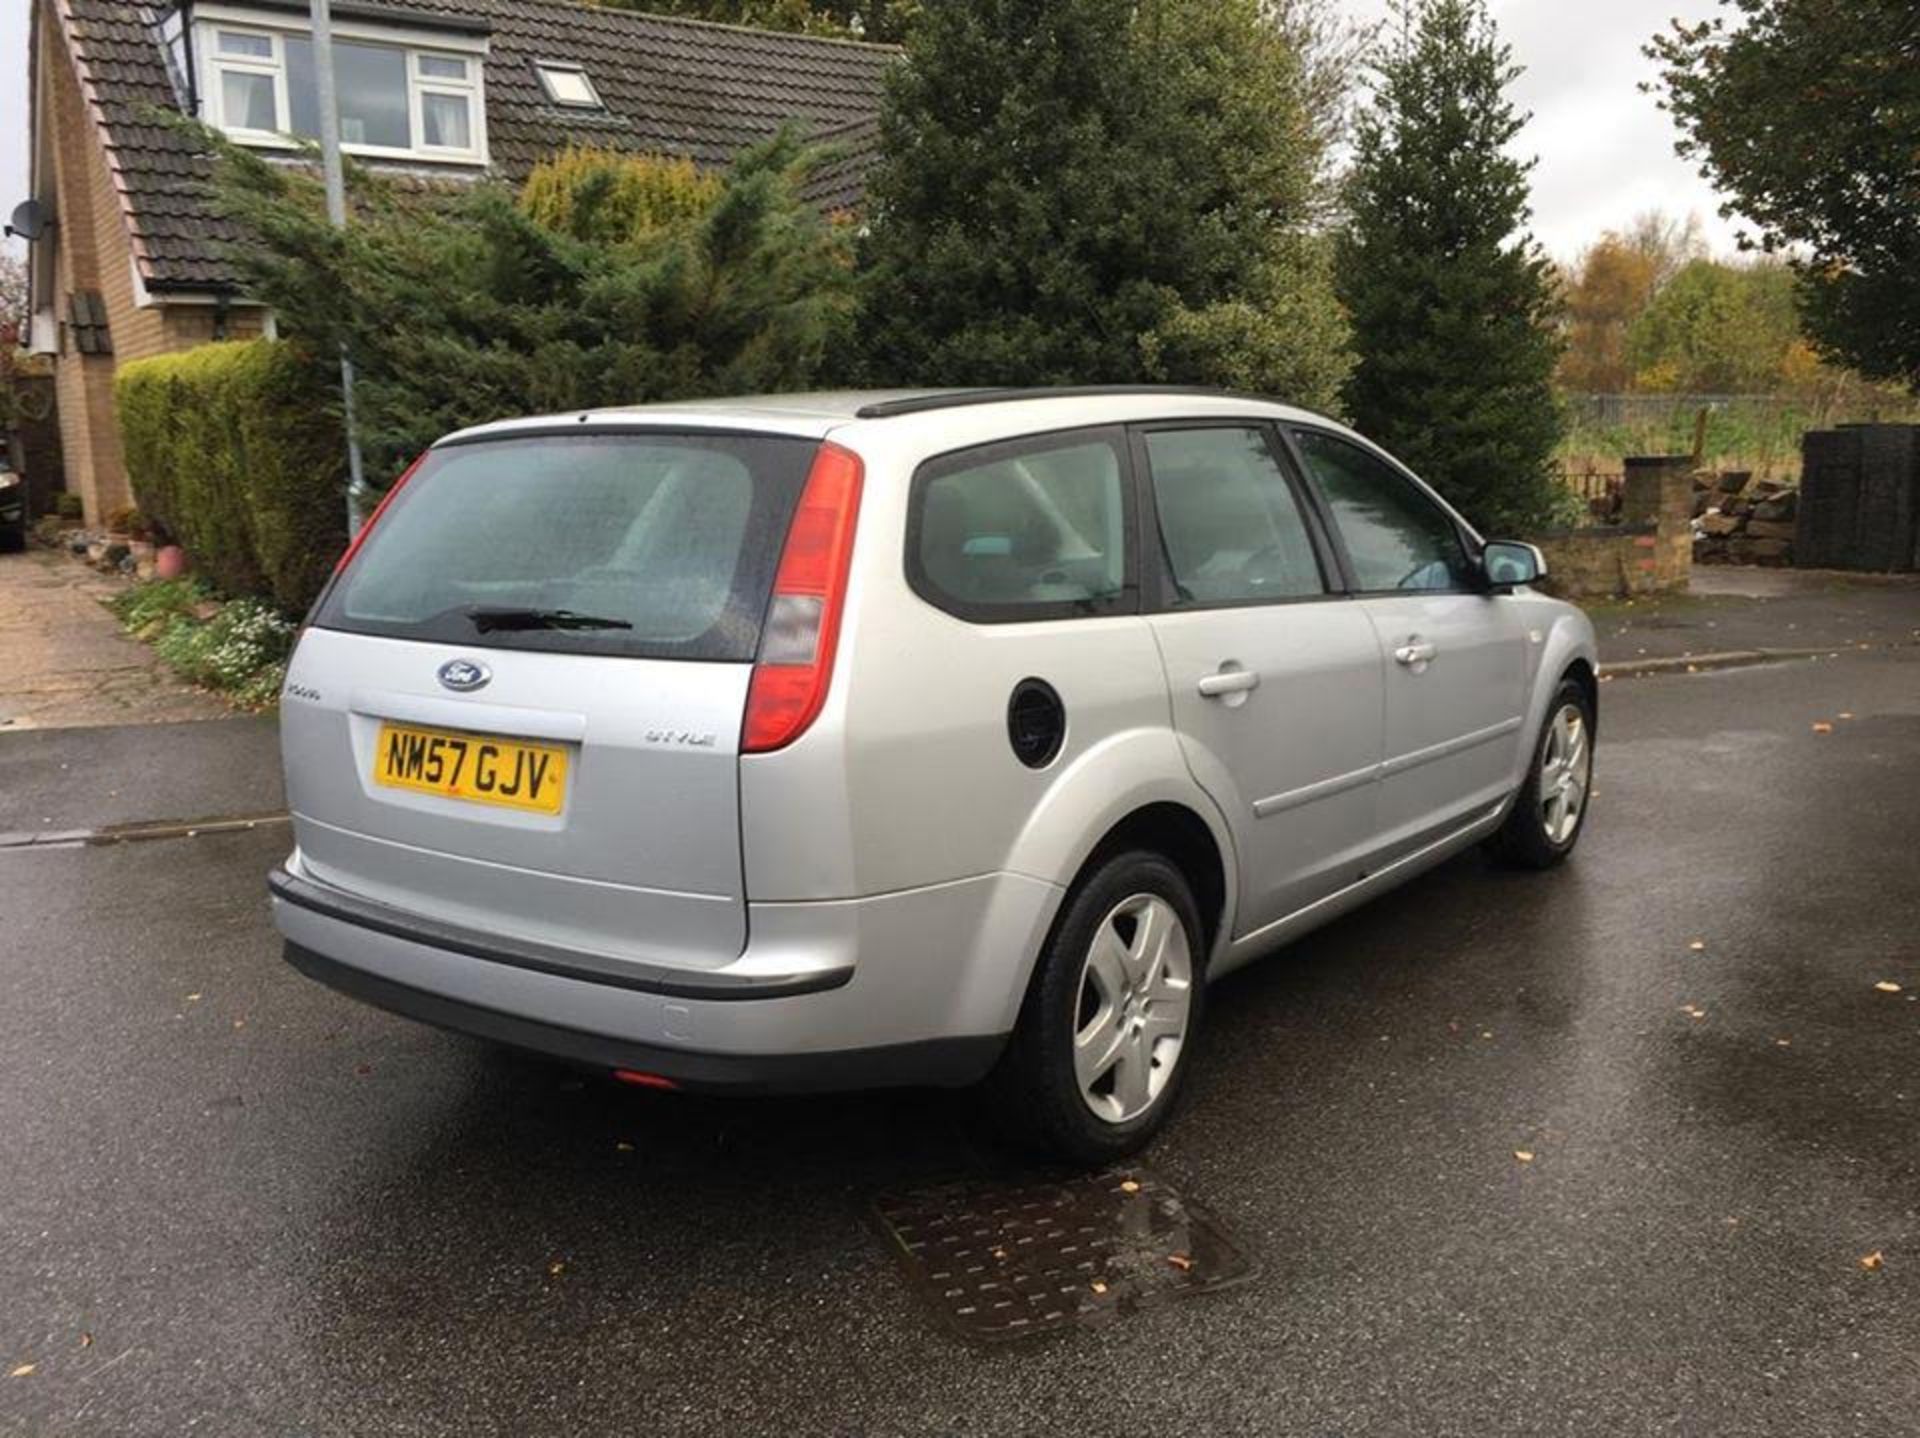 2008/57 PLATE FORD FOCUS 1.6 PETROL STYLE ESTATE, 91K MILES. MOT JULY 2017. - Image 12 of 12